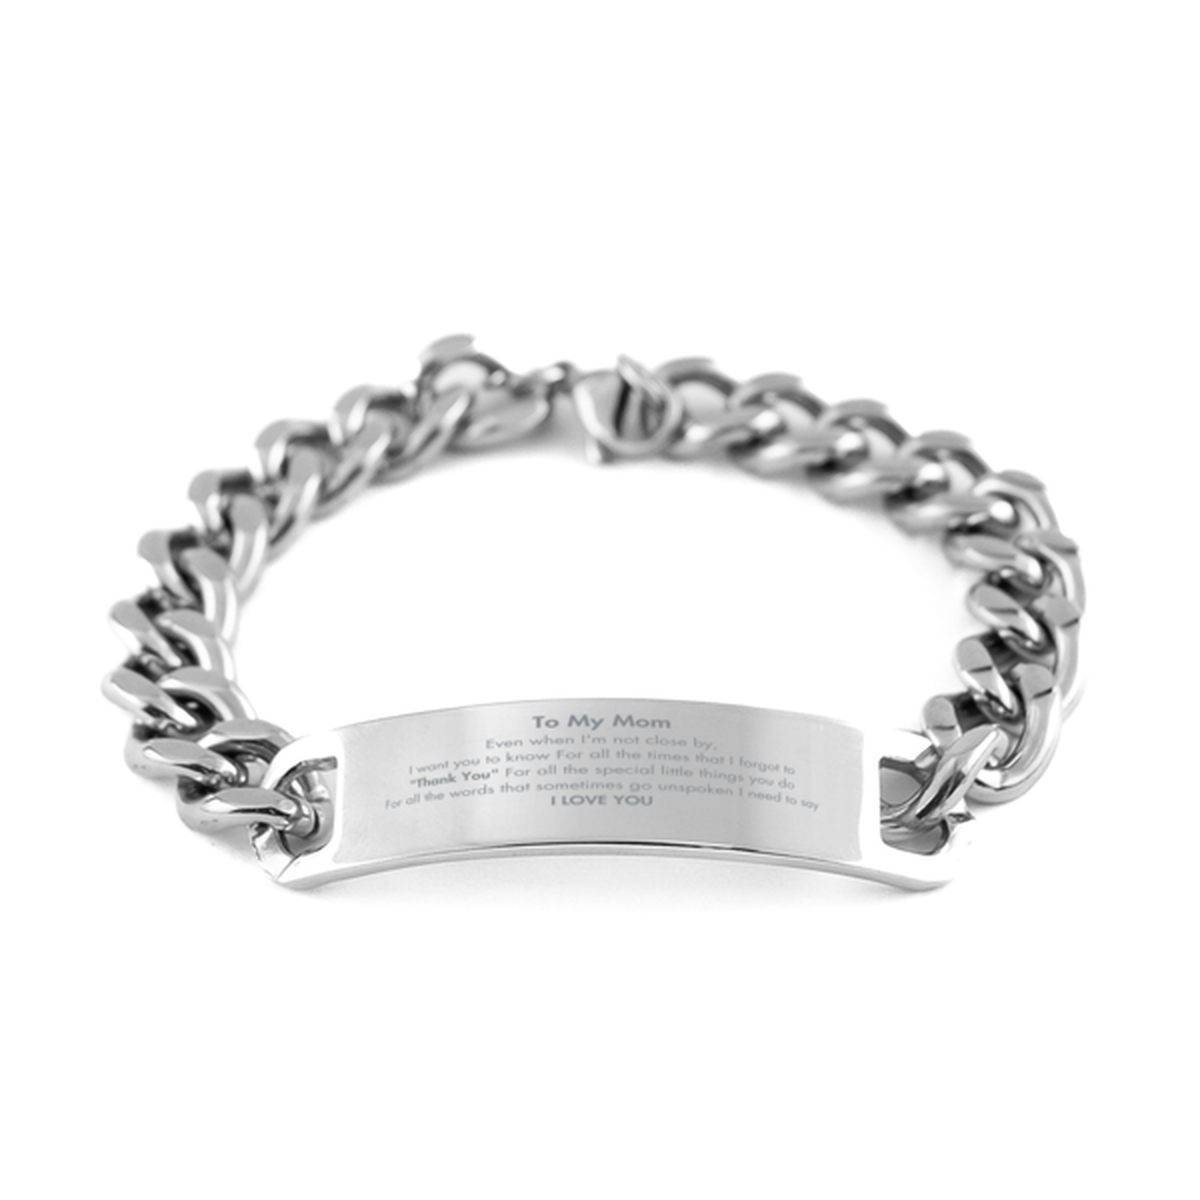 Thank You Gifts for Mom, Keepsake Cuban Chain Stainless Steel Bracelet Gifts for Mom Birthday Mother's day Father's Day Mom For all the words That sometimes go unspoken I need to say I LOVE YOU